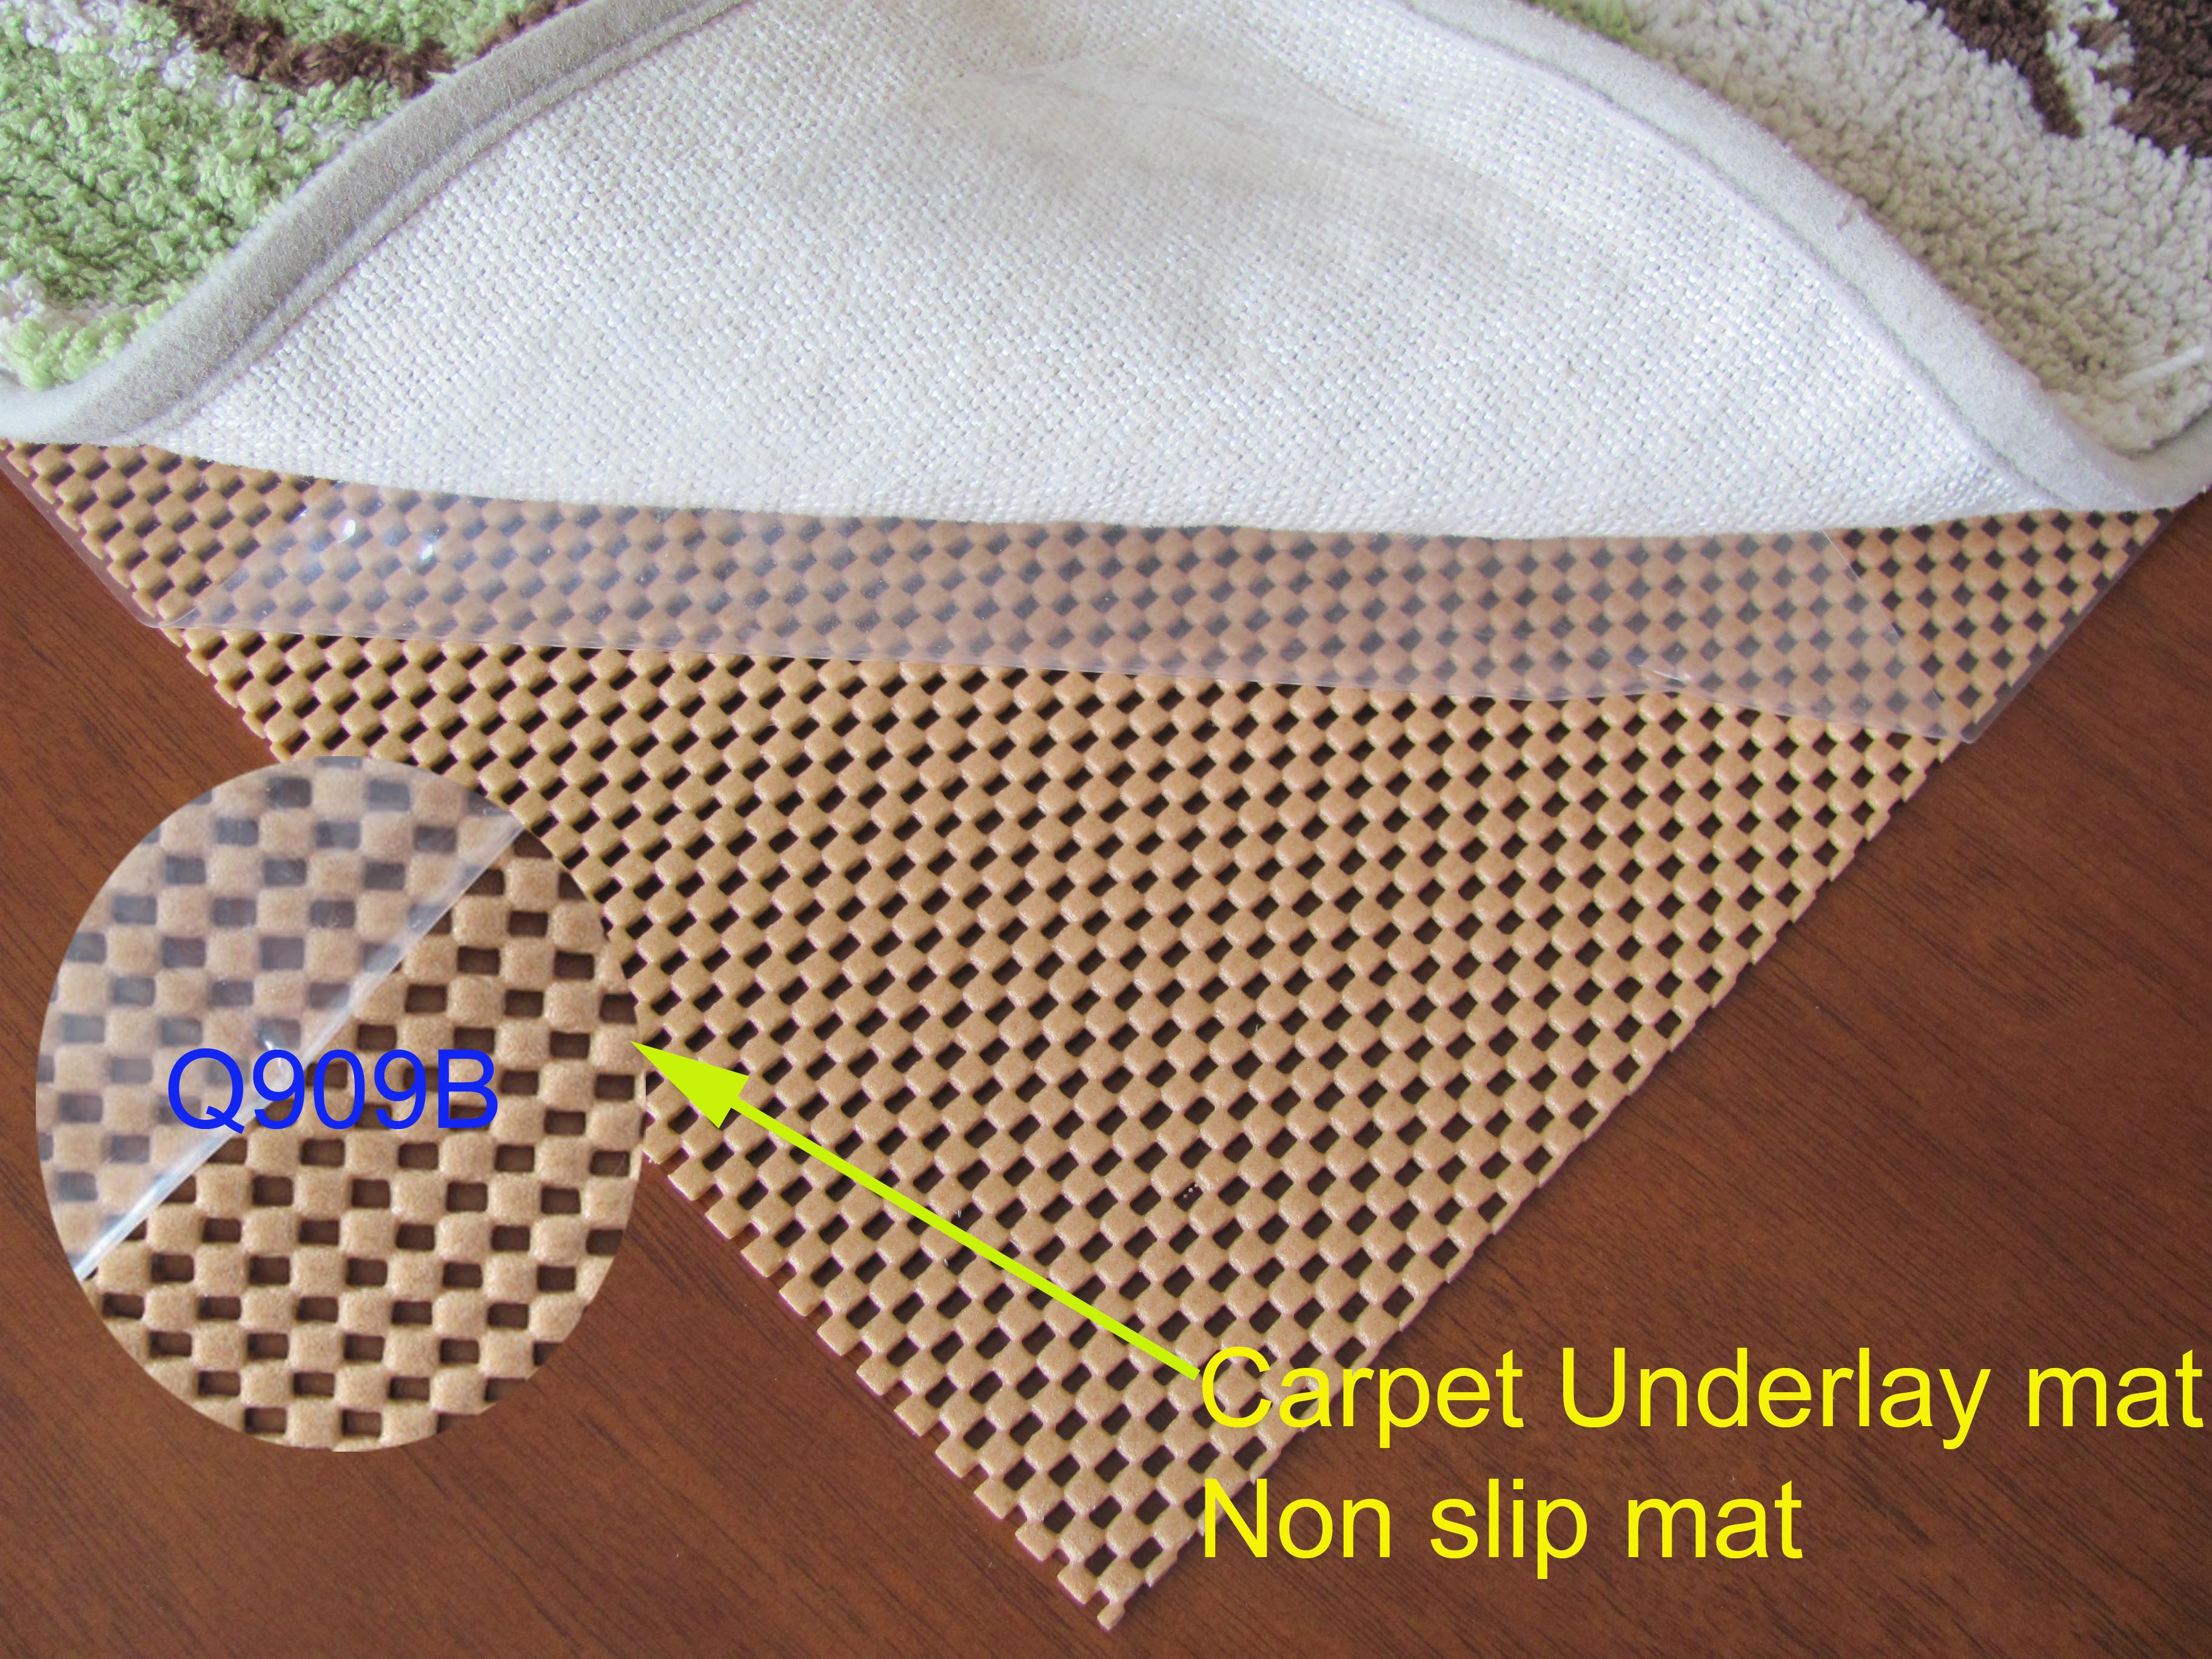 Non Slip Carpet Underlay Can Be Placed under The Carpet To Prevent Movement, for Home Use